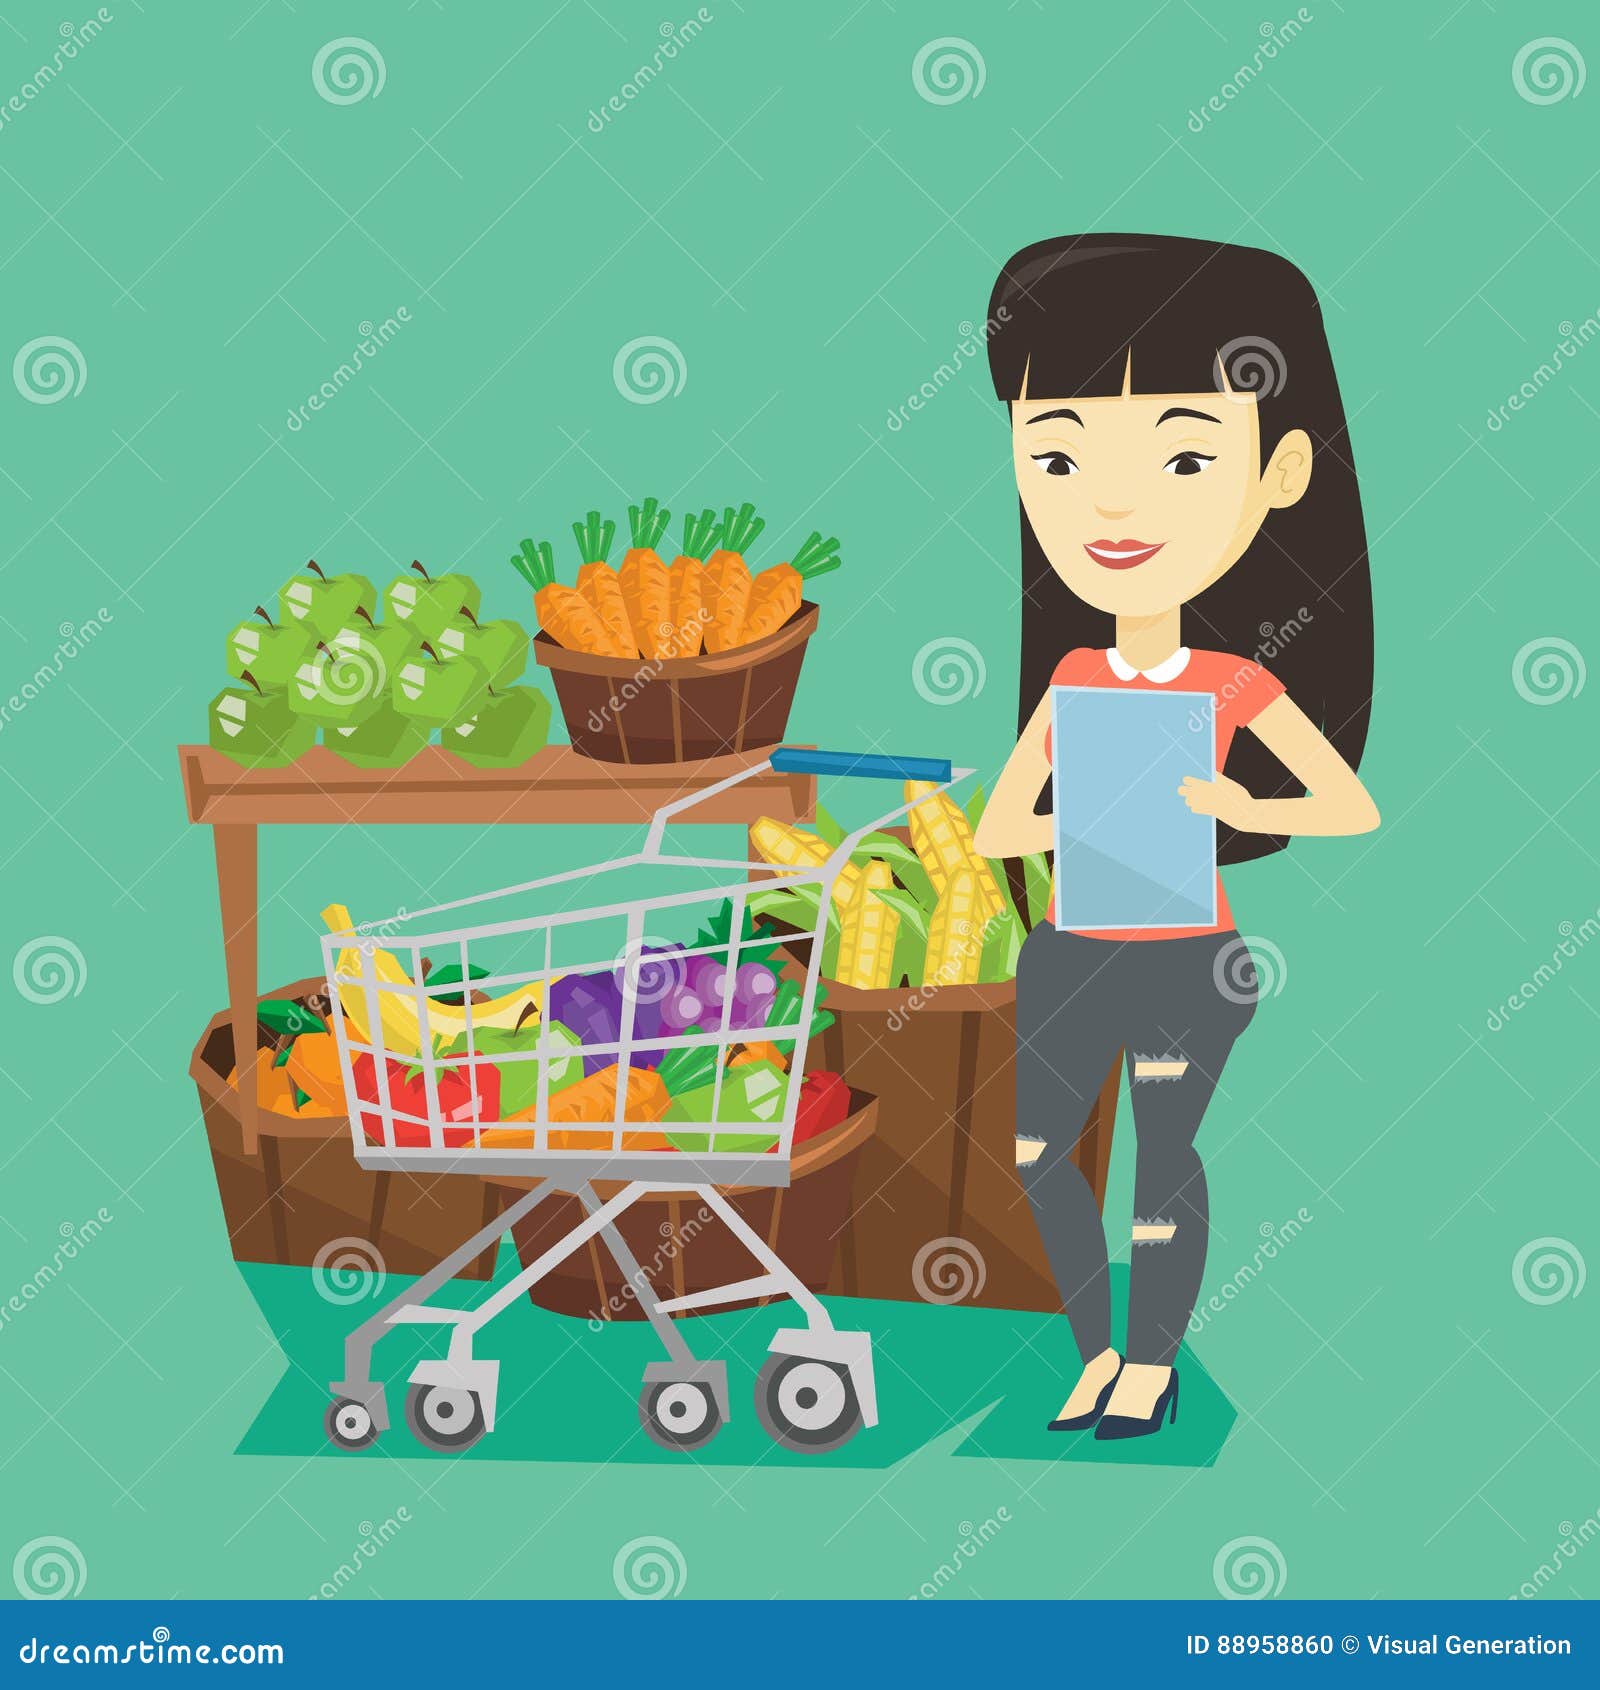 Woman with Shopping List Vector Illustration. Stock Vector ...